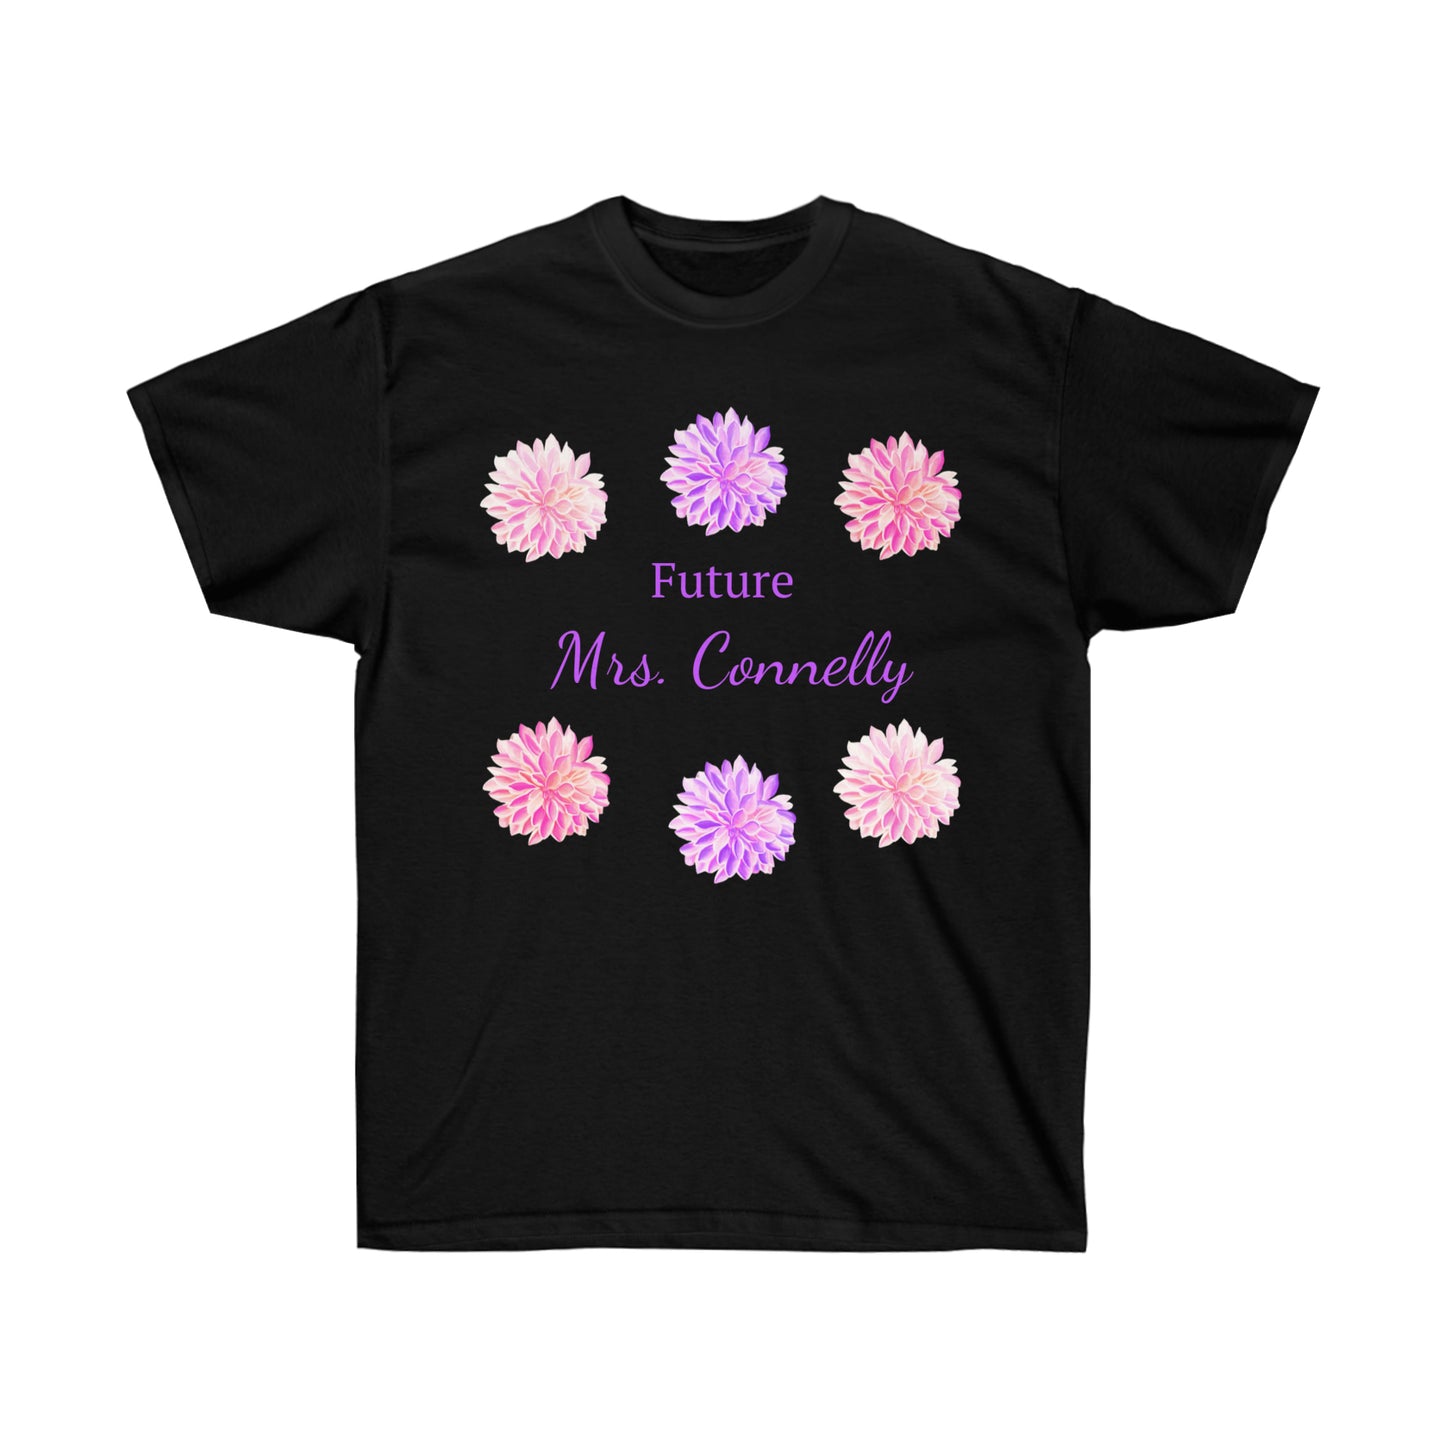 Future Mrs. Connelly Unisex Ultra Cotton Tee